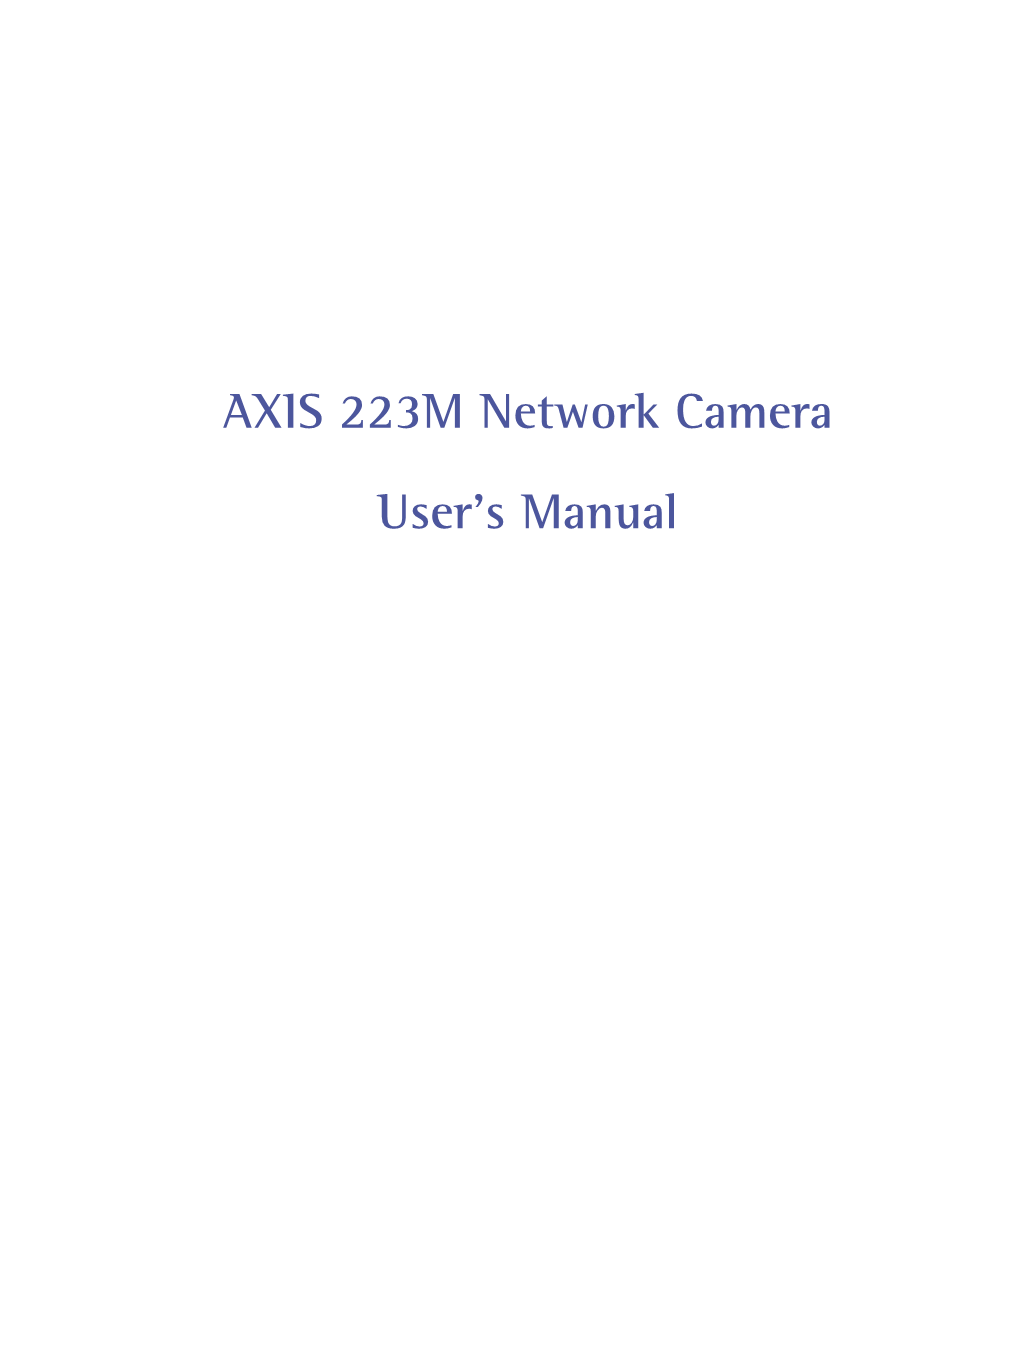 AXIS 223M Network Camera User's Manual